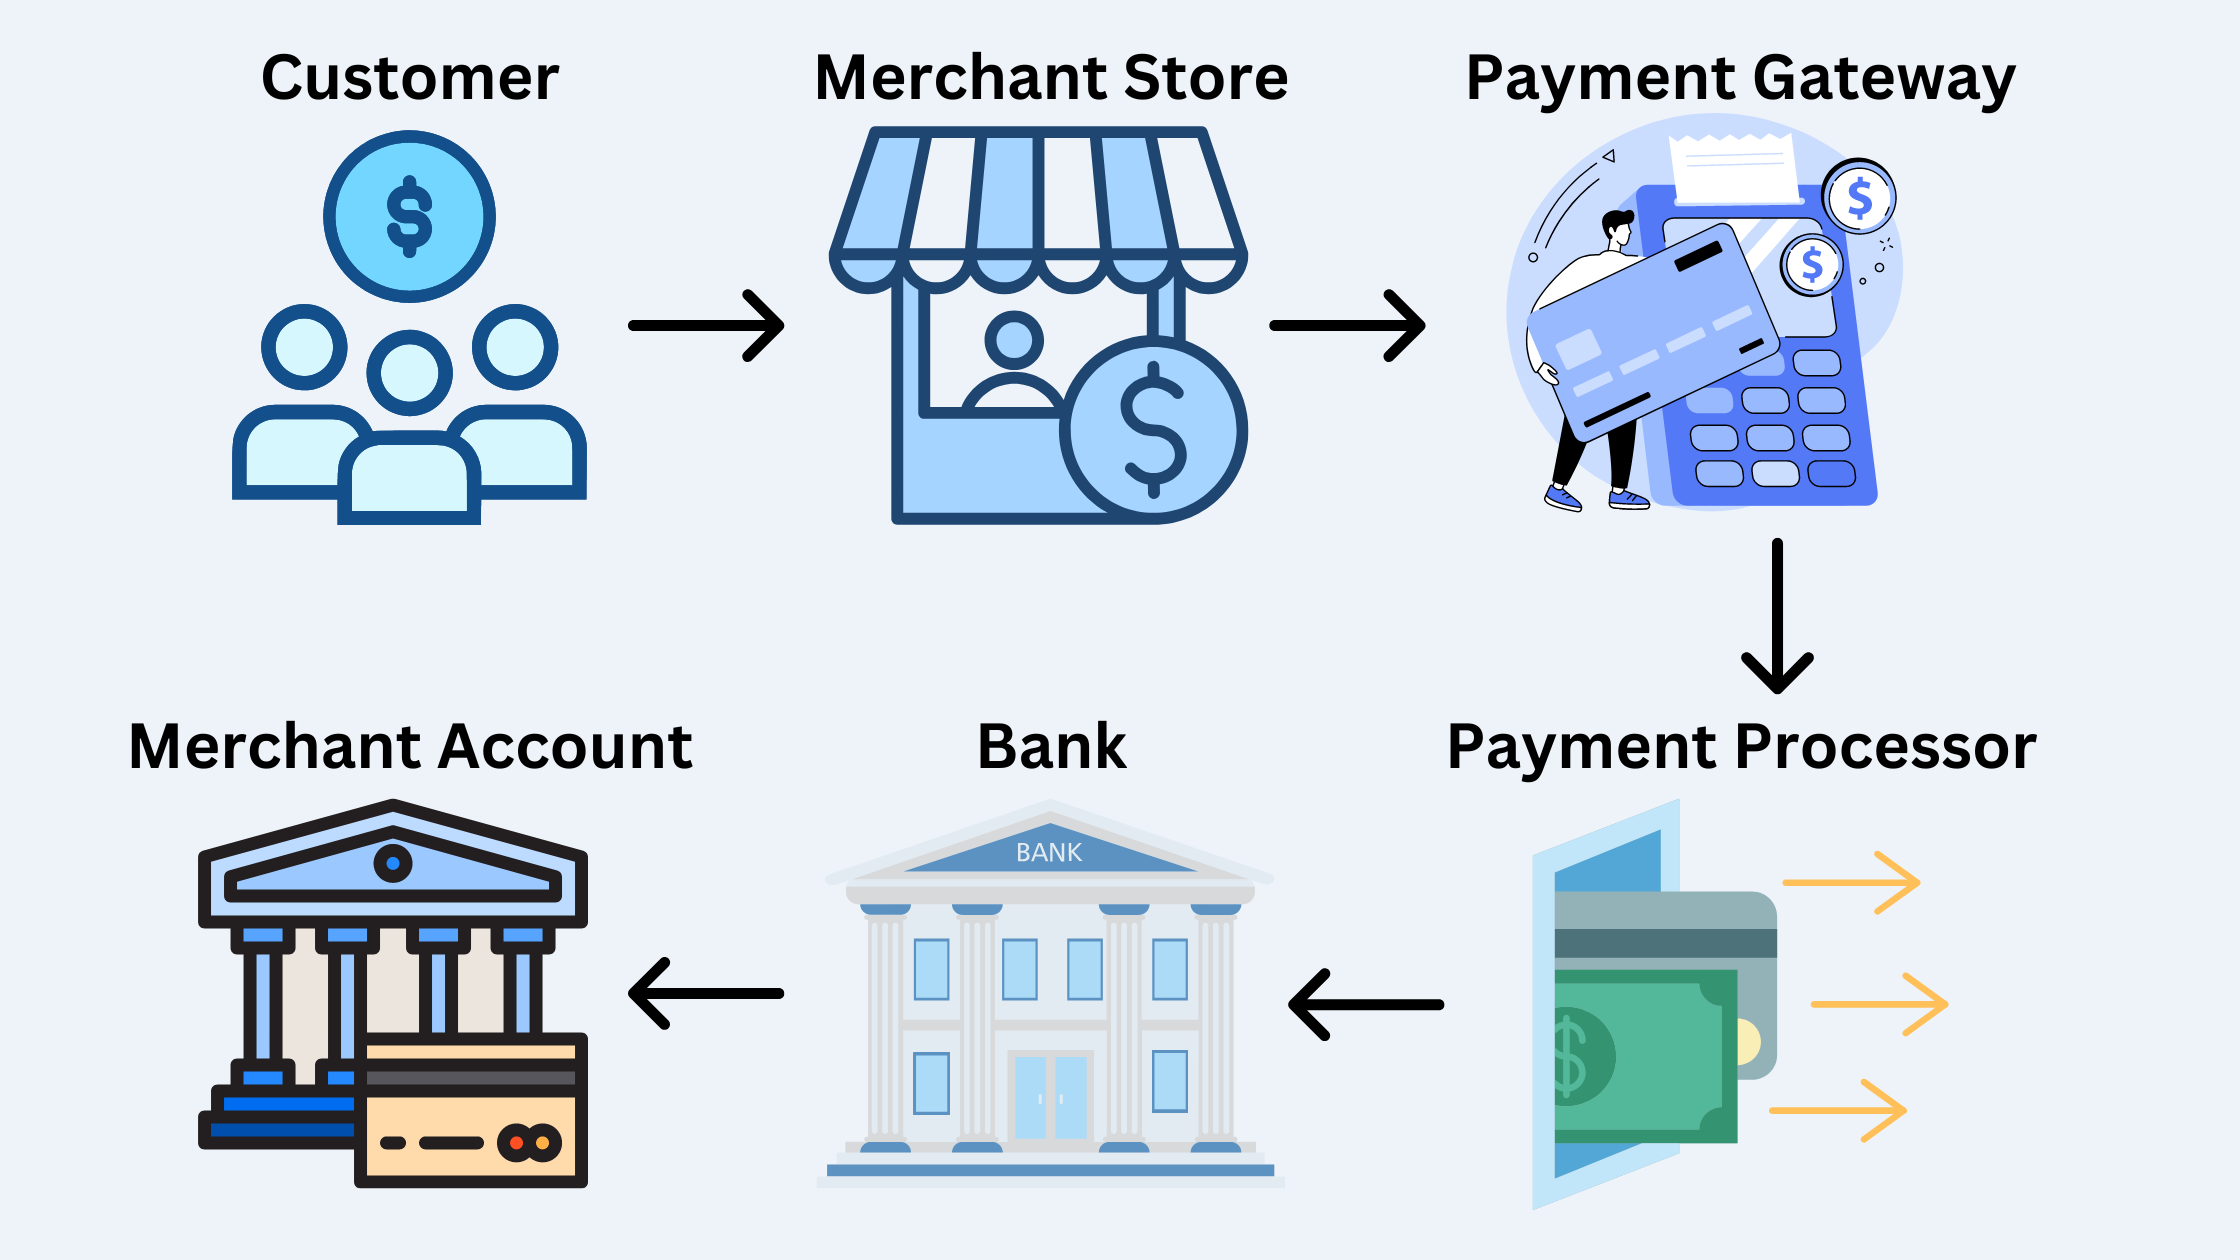 The process of completing transactions using a payment gateway and a a payment processor